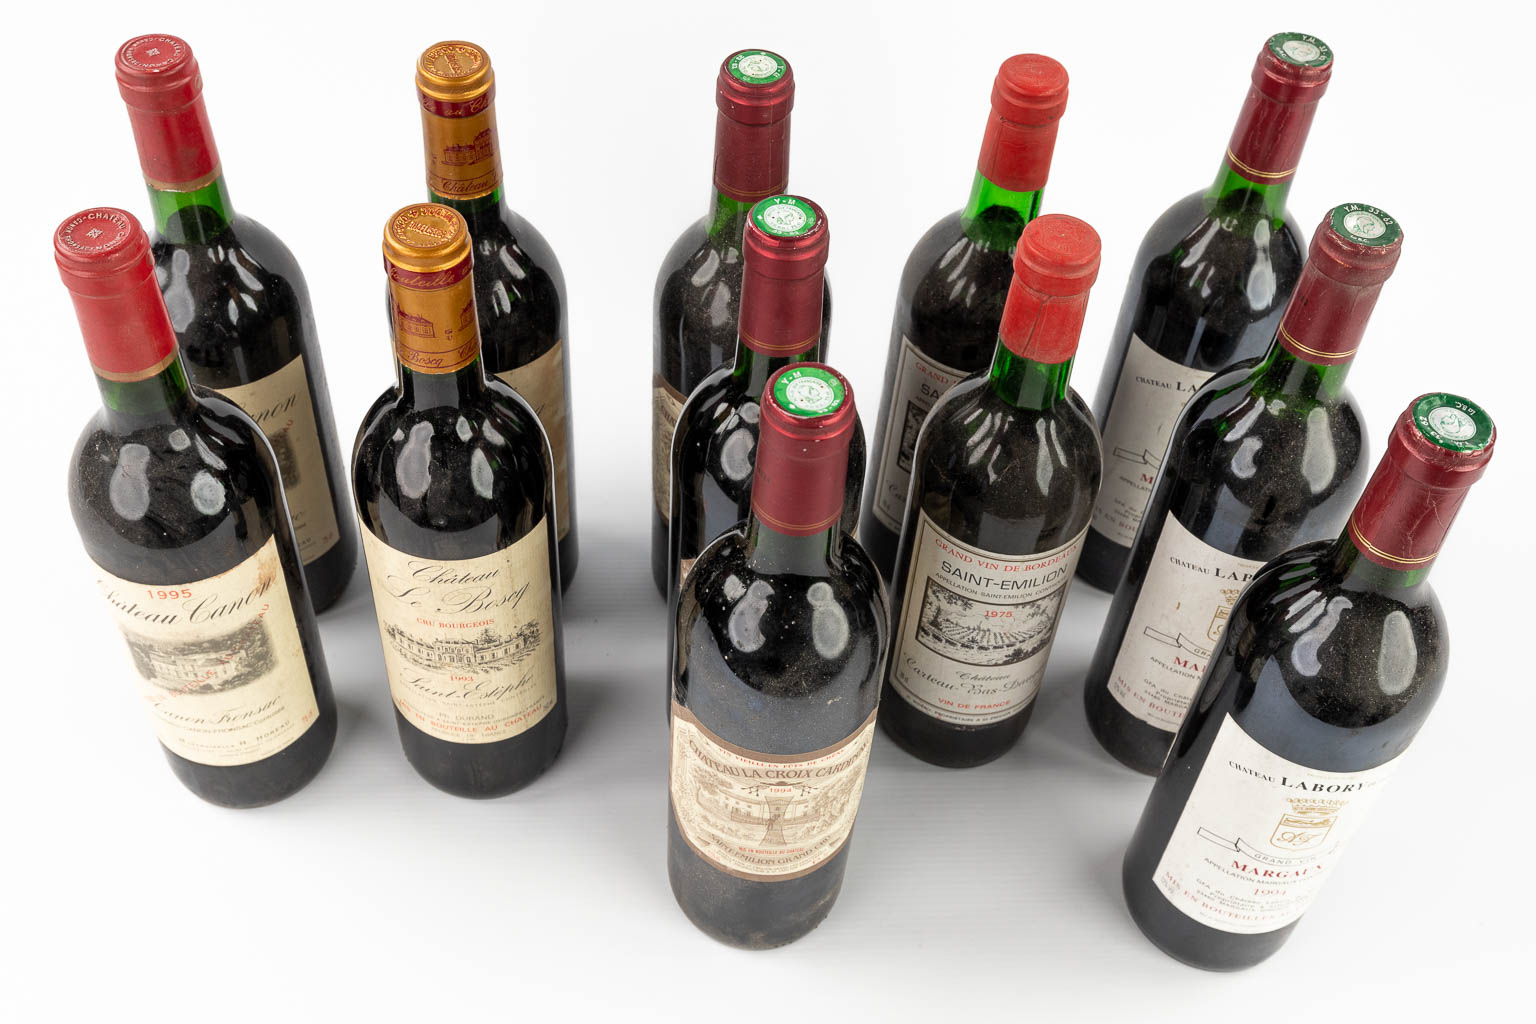 A collection of 12 bottles of wine. 1975 untill 1995.